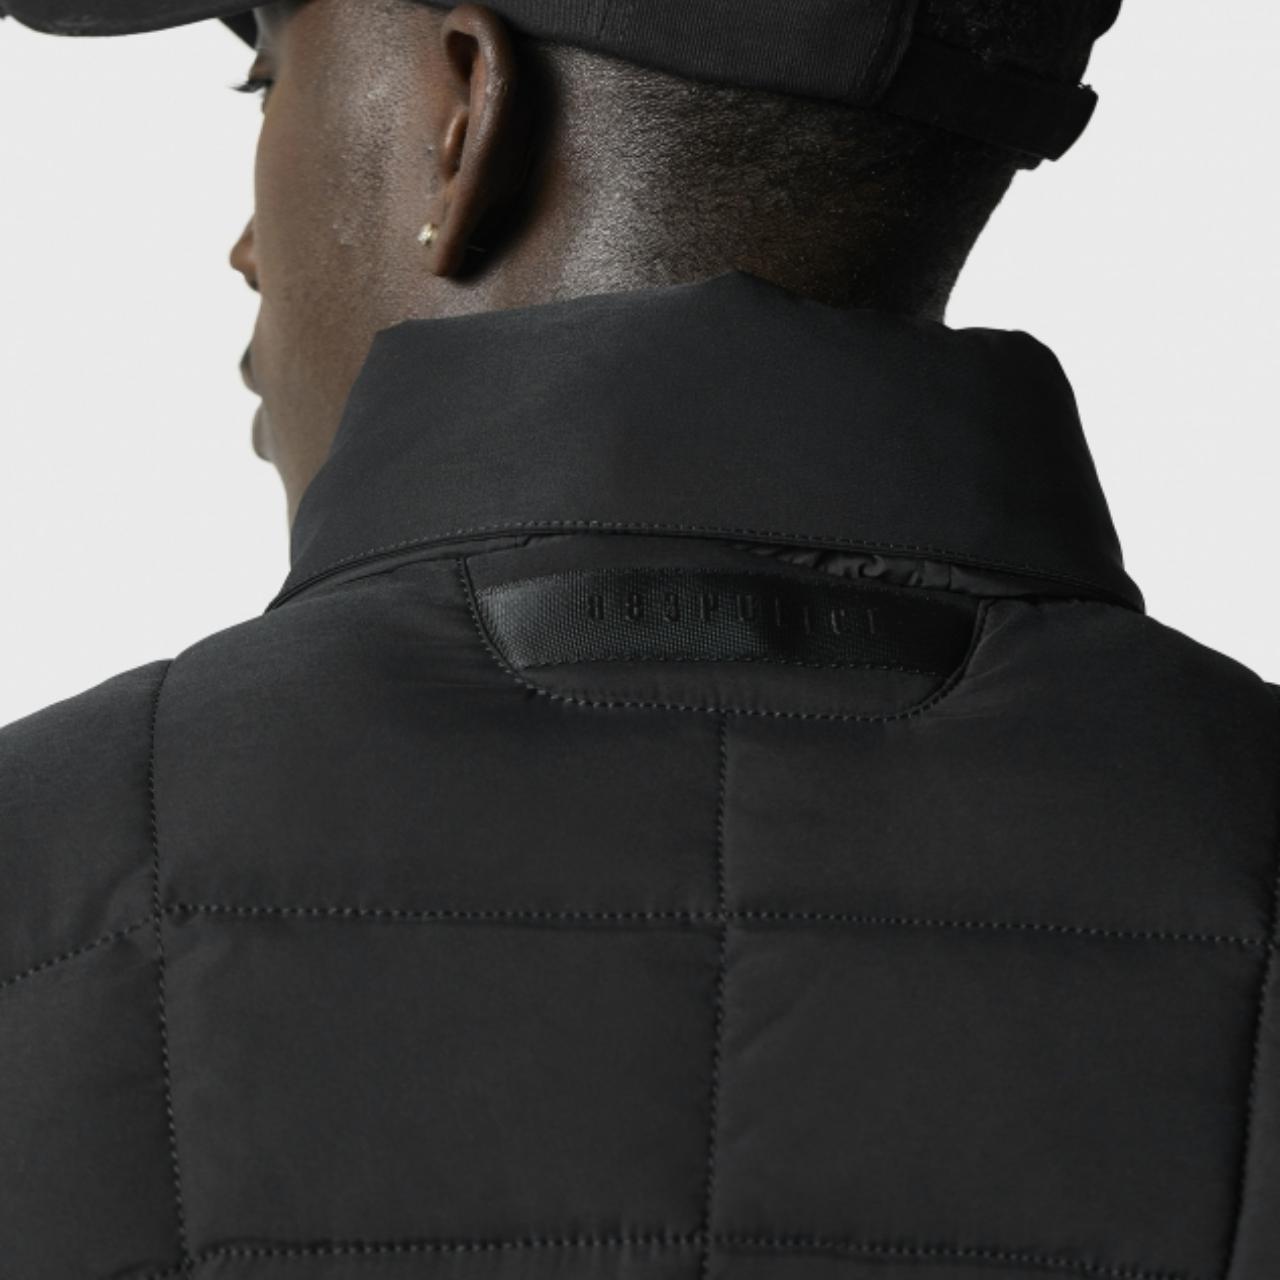 Product Image 4 - 883 POLICE 

AVANT GILET BLACK

The